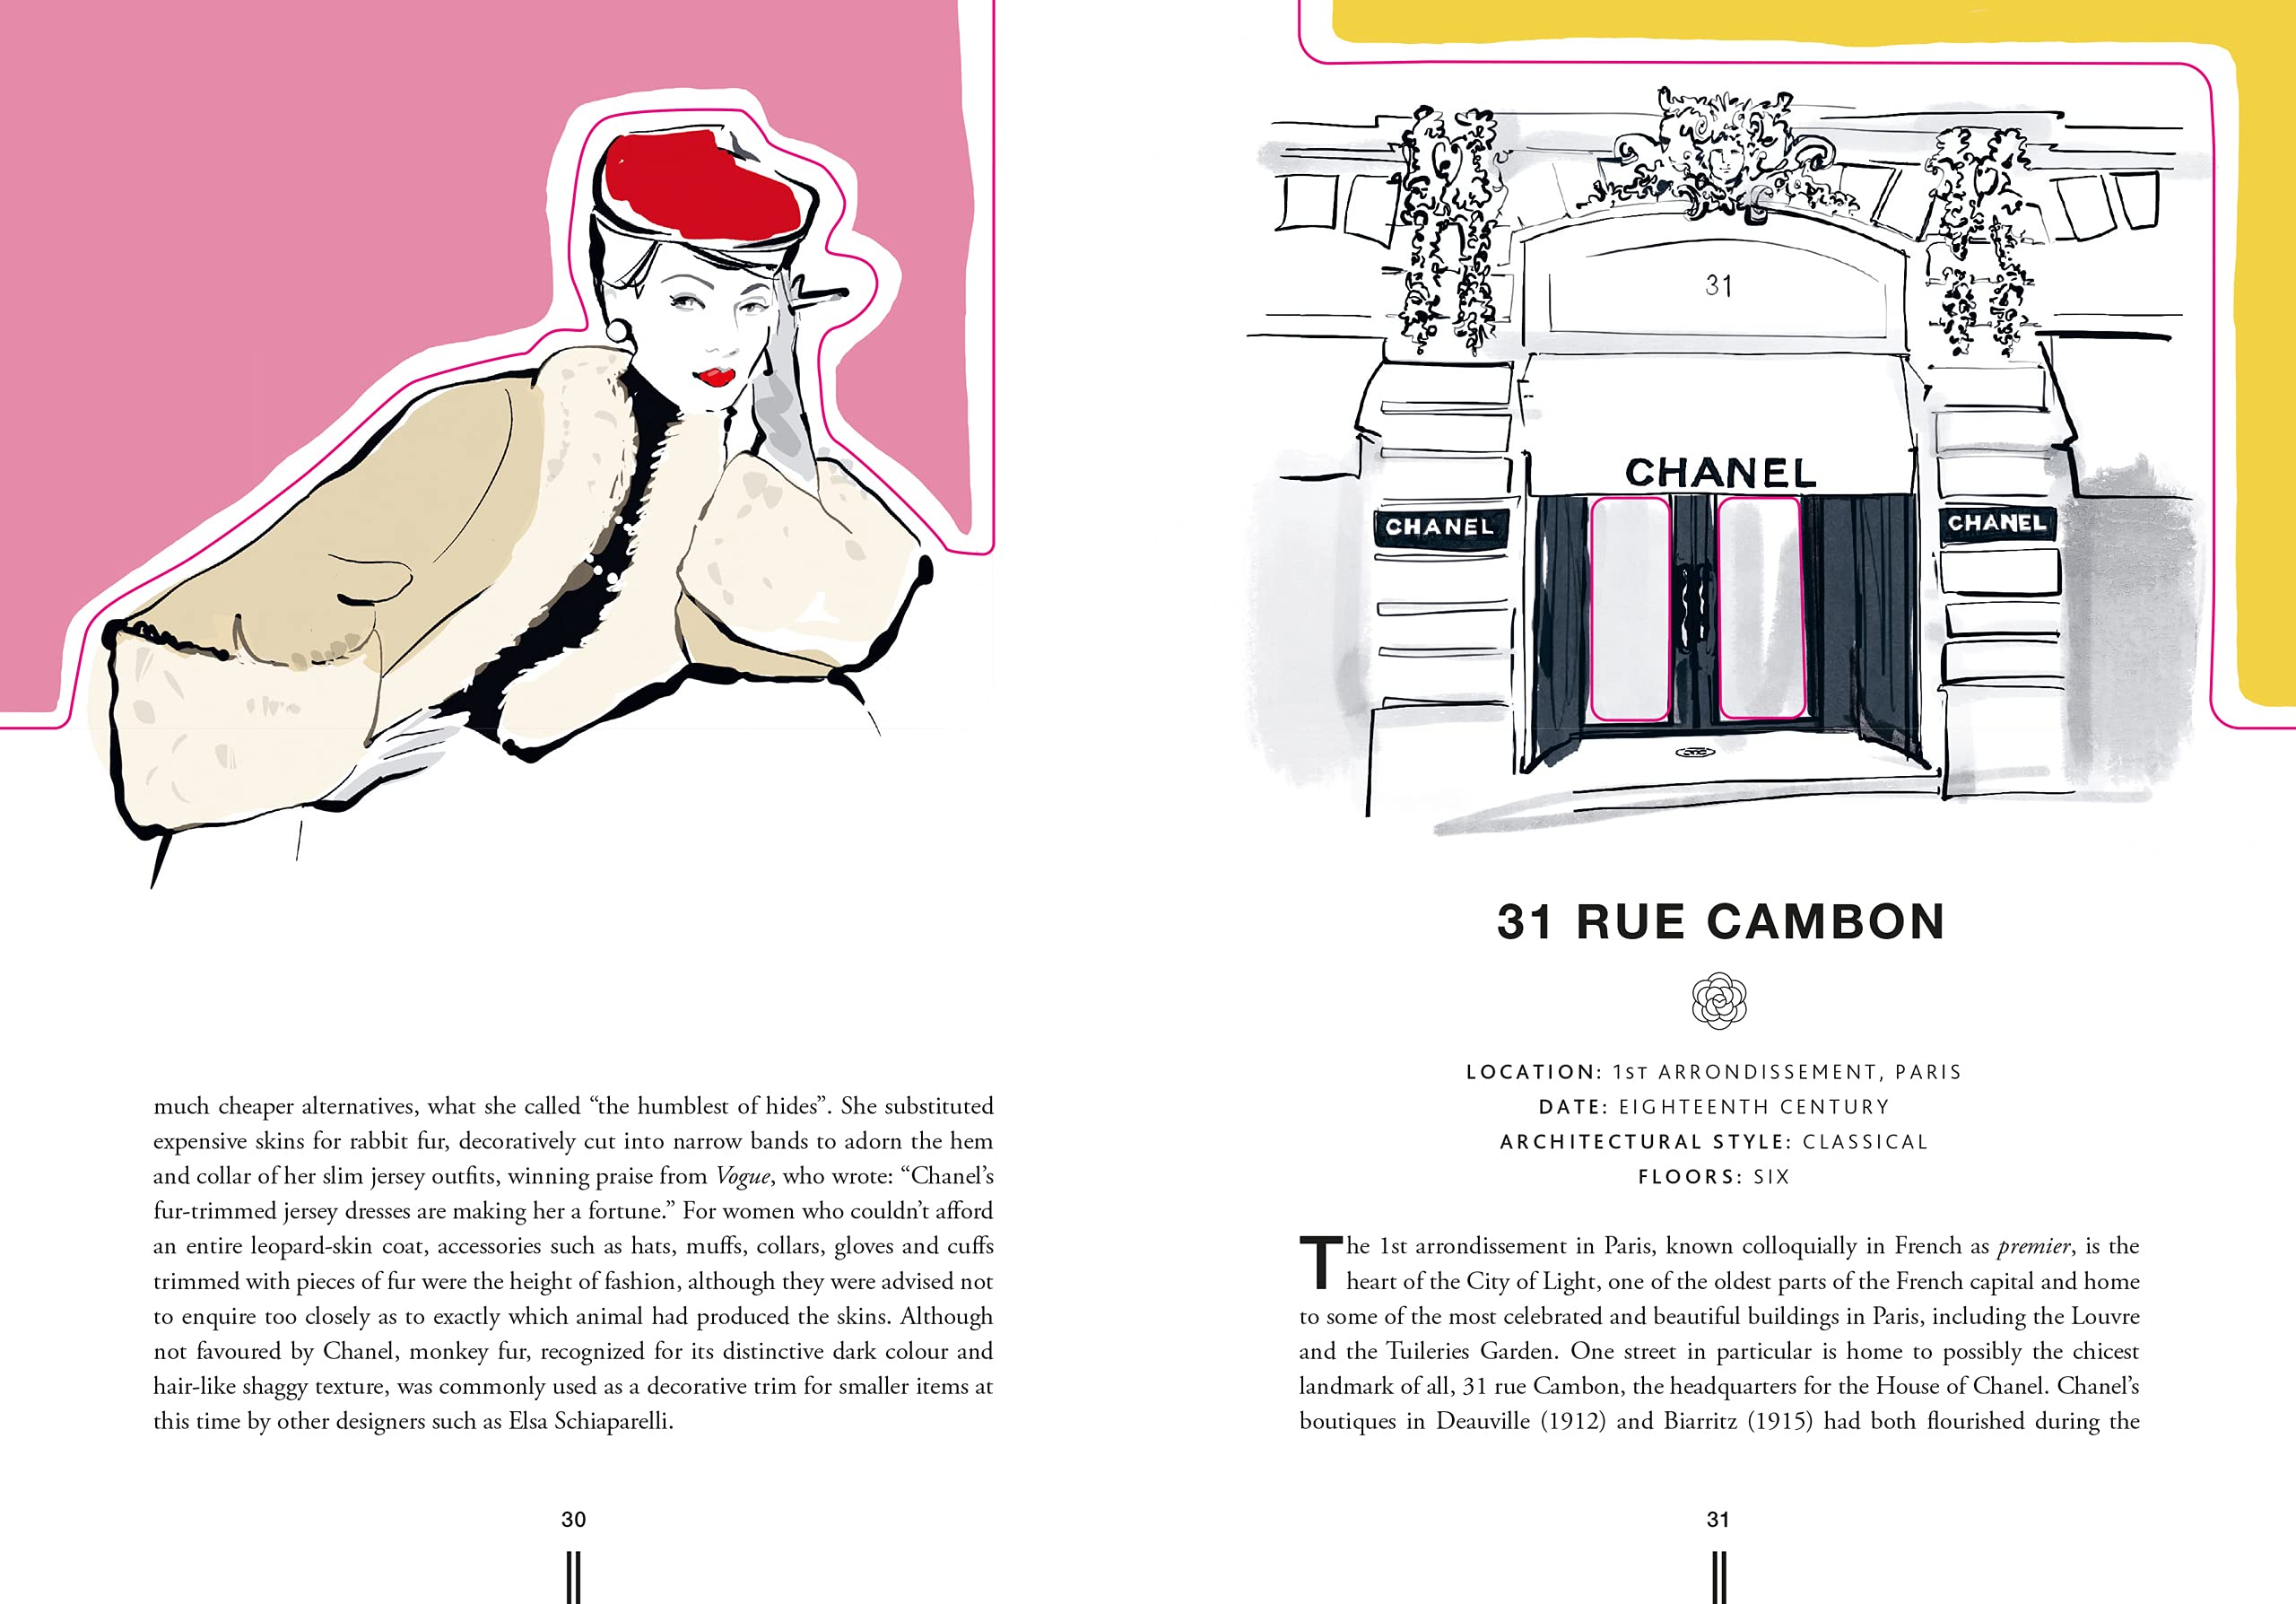 Chanel Paperscapes: The book that transforms into a work of art